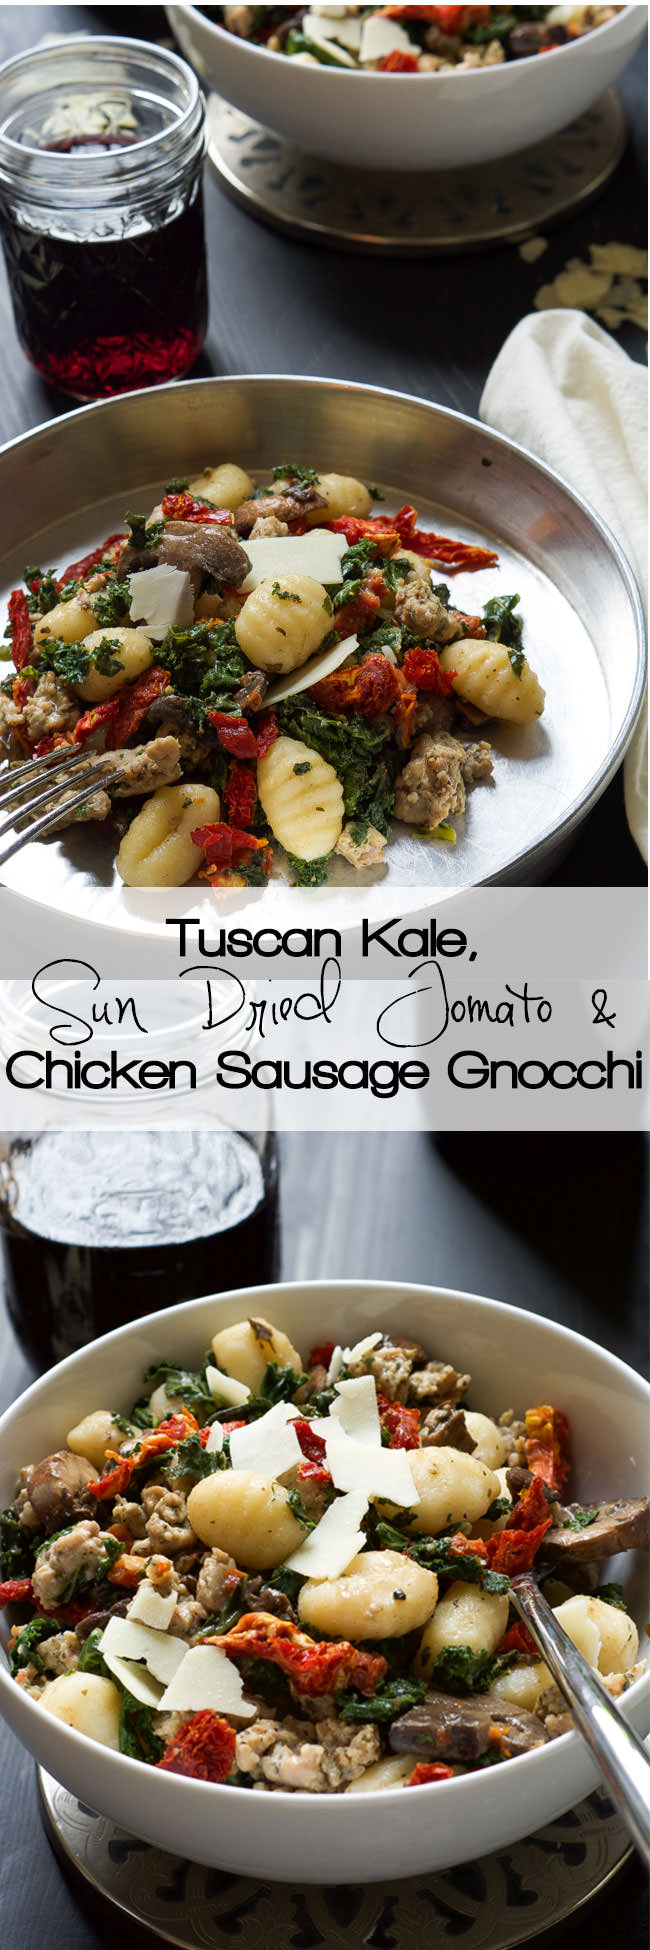 With only one pot, you can whip up this flavorful Tuscan Kale & Sun Dried Tomato Chicken Sausage Gnocchi dish! A family favorite in our house that is made time and time again!